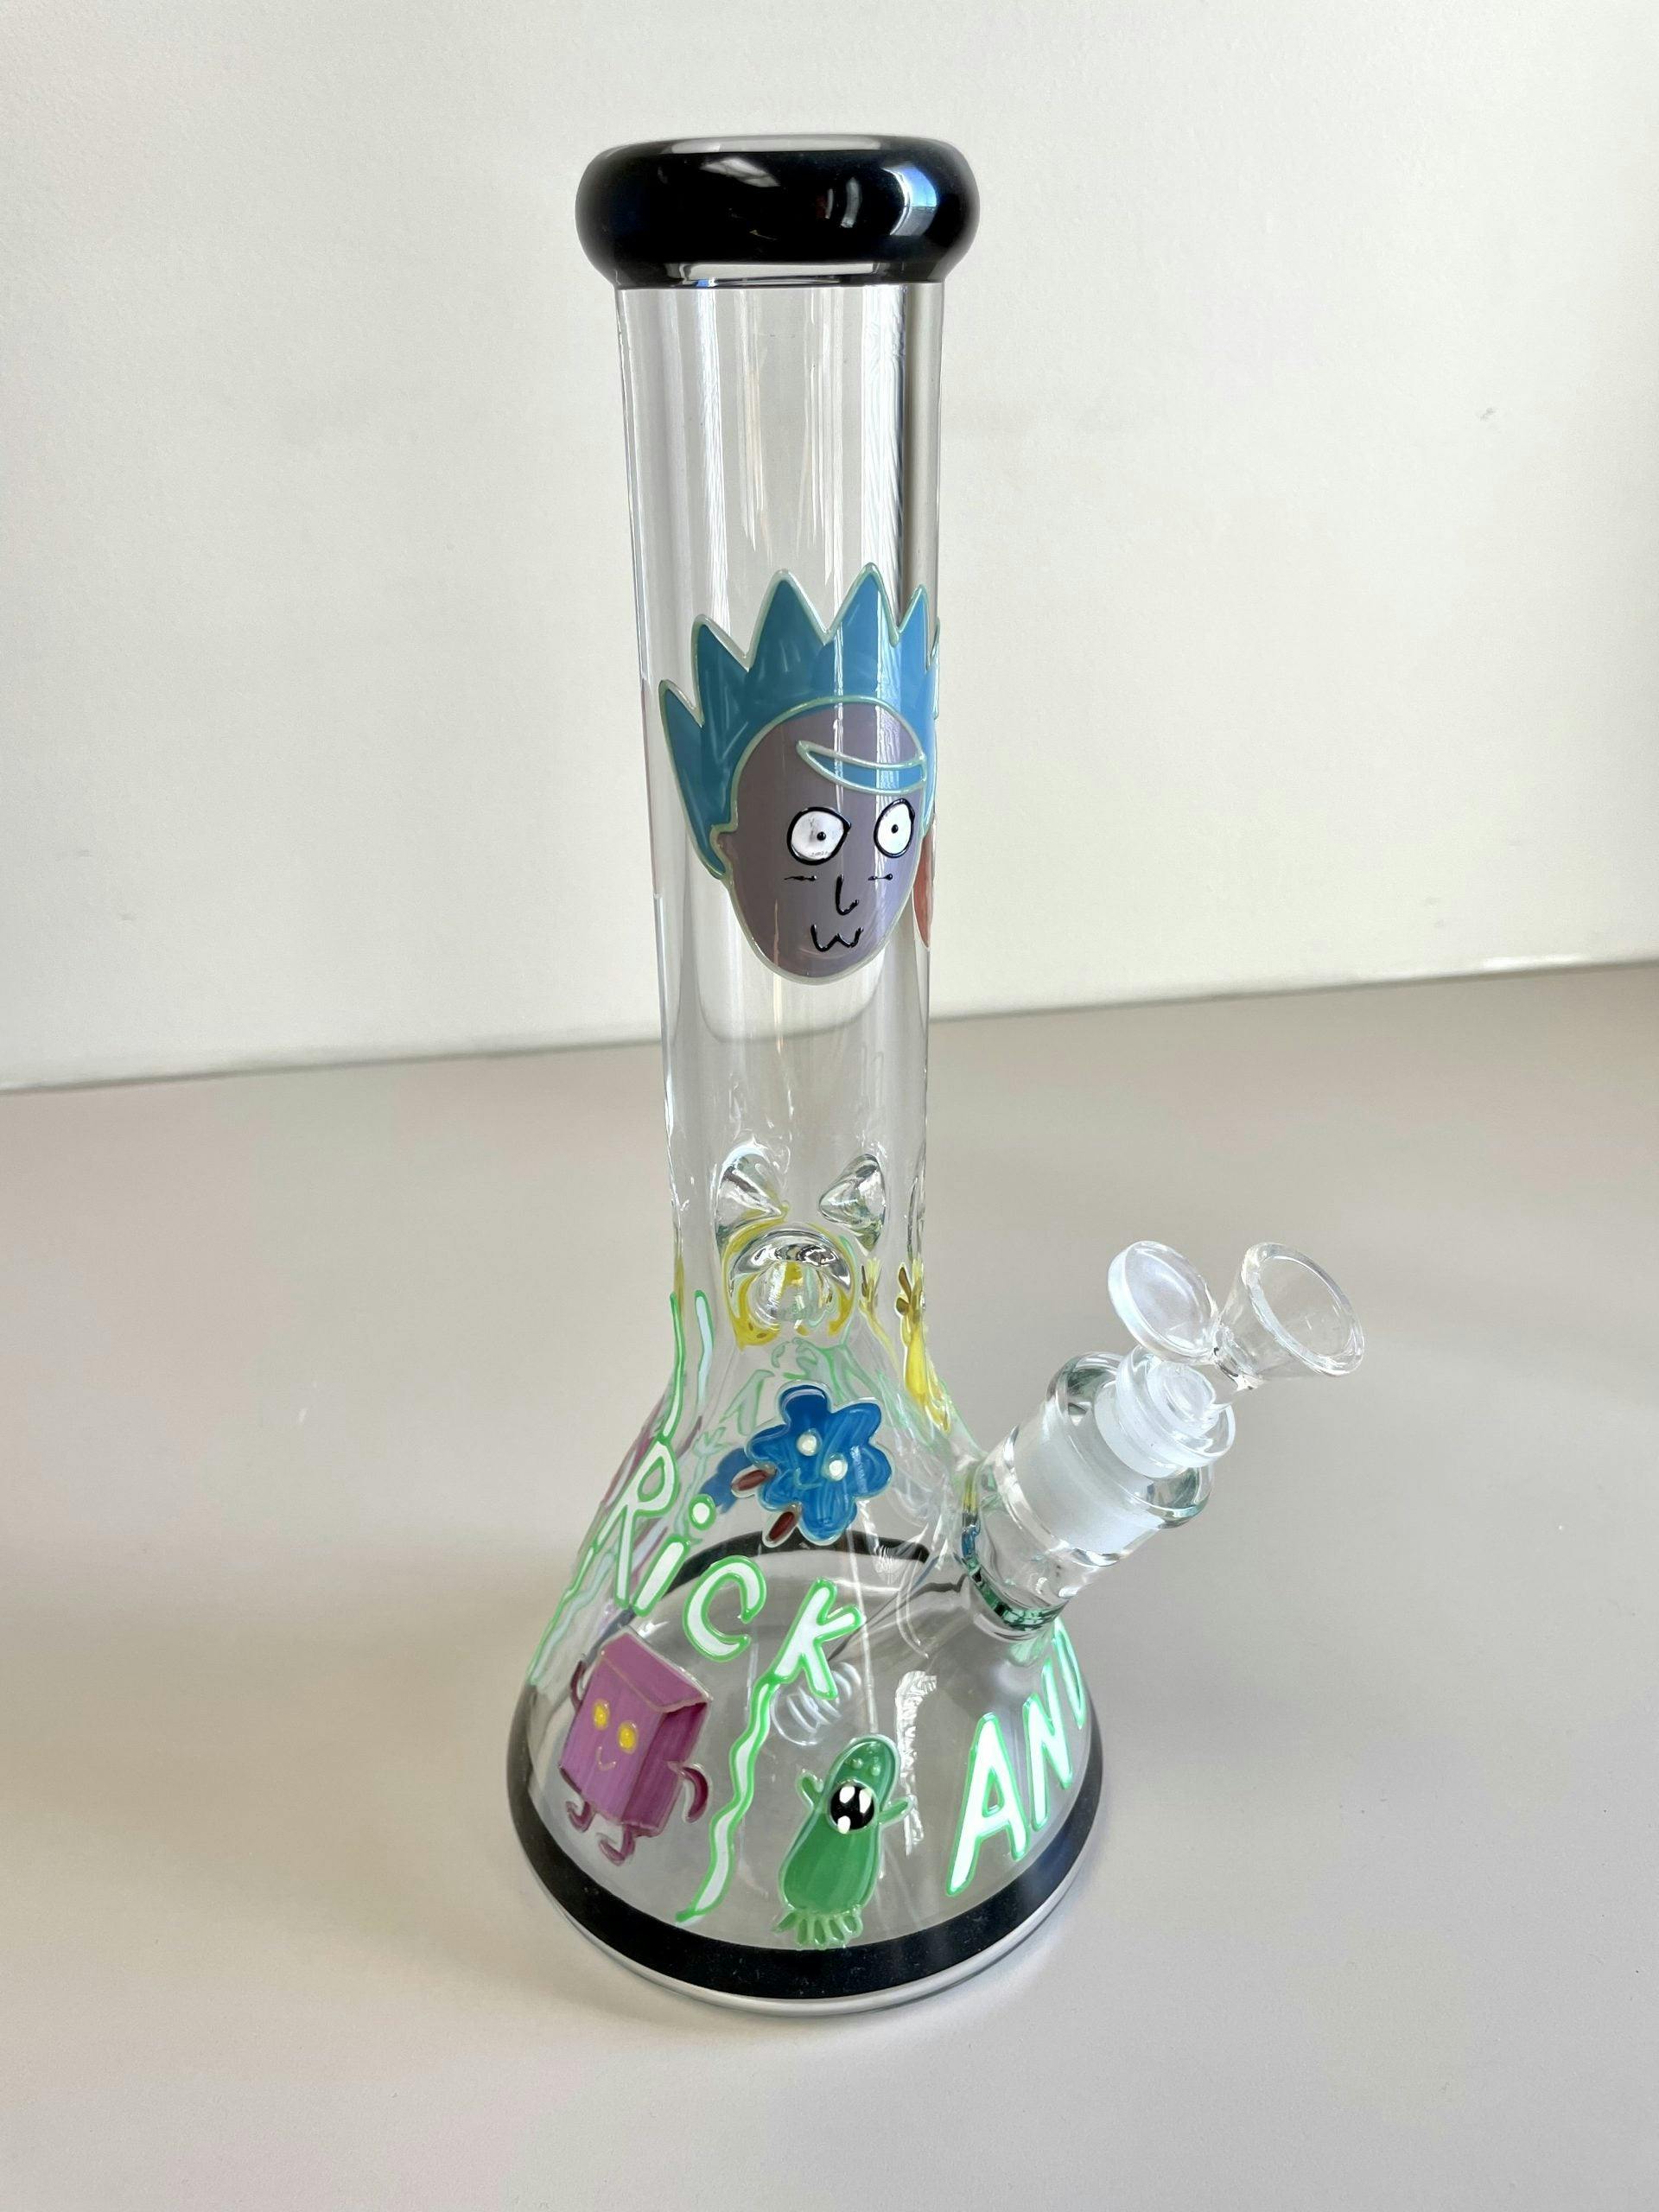 Product for sale: CC-50 12" R/M Glass Bong